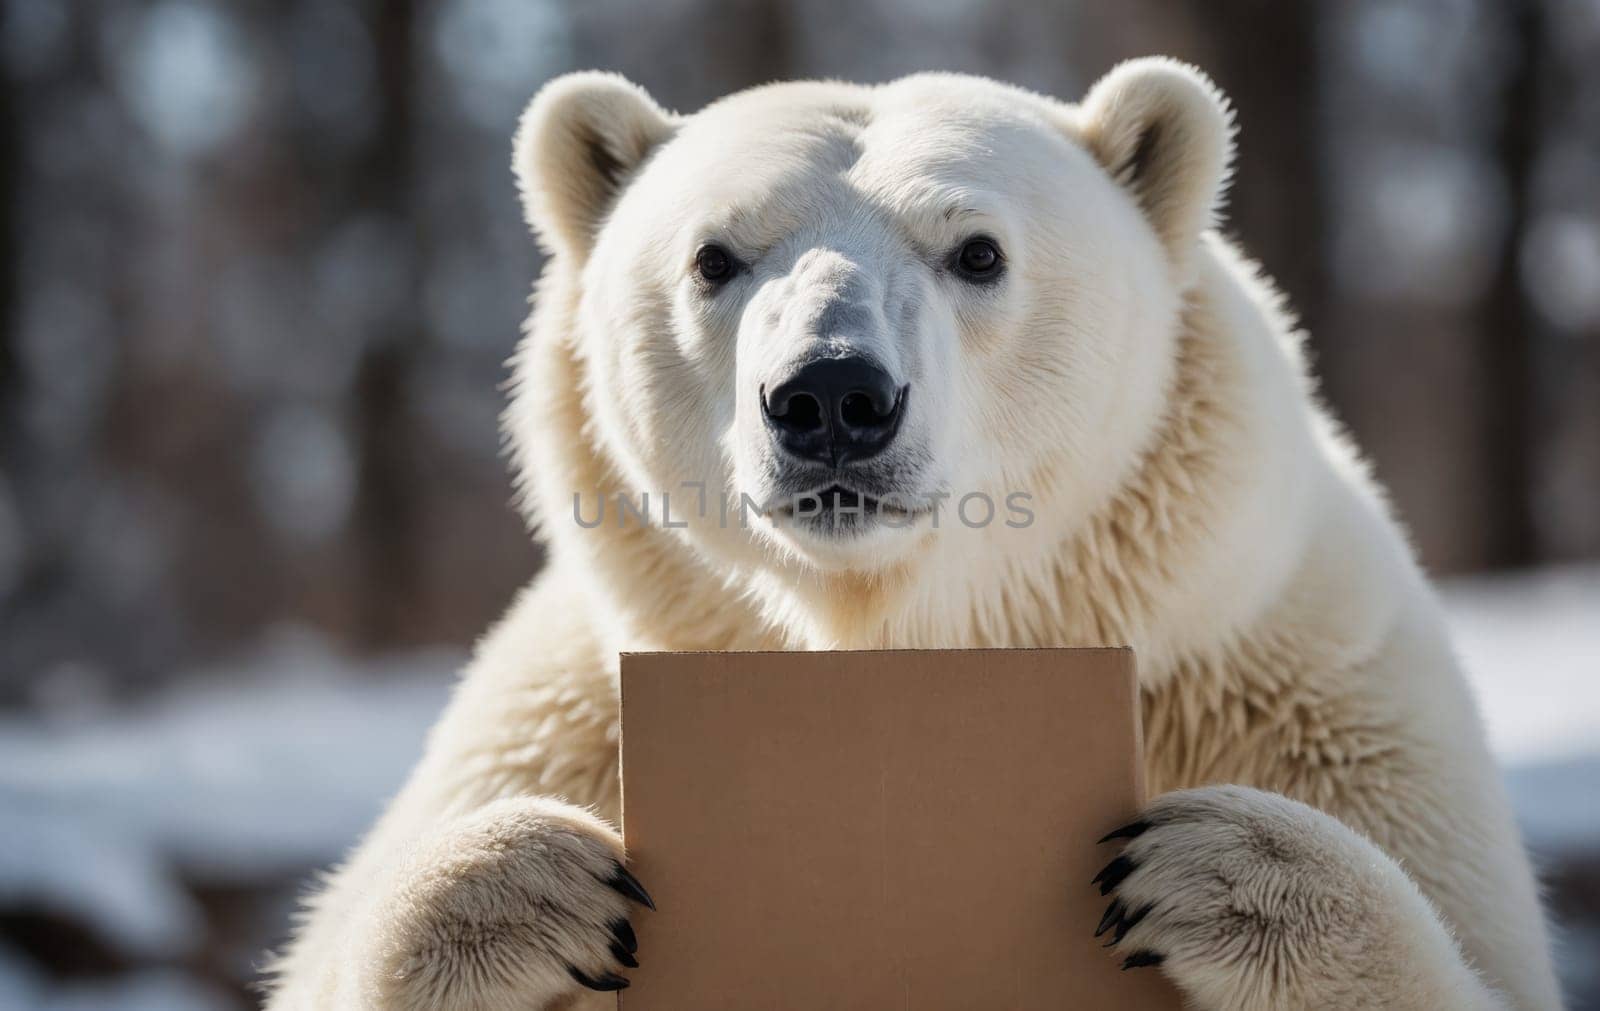 Carnivore Polar bear with snout holding a cardboard box by Andre1ns